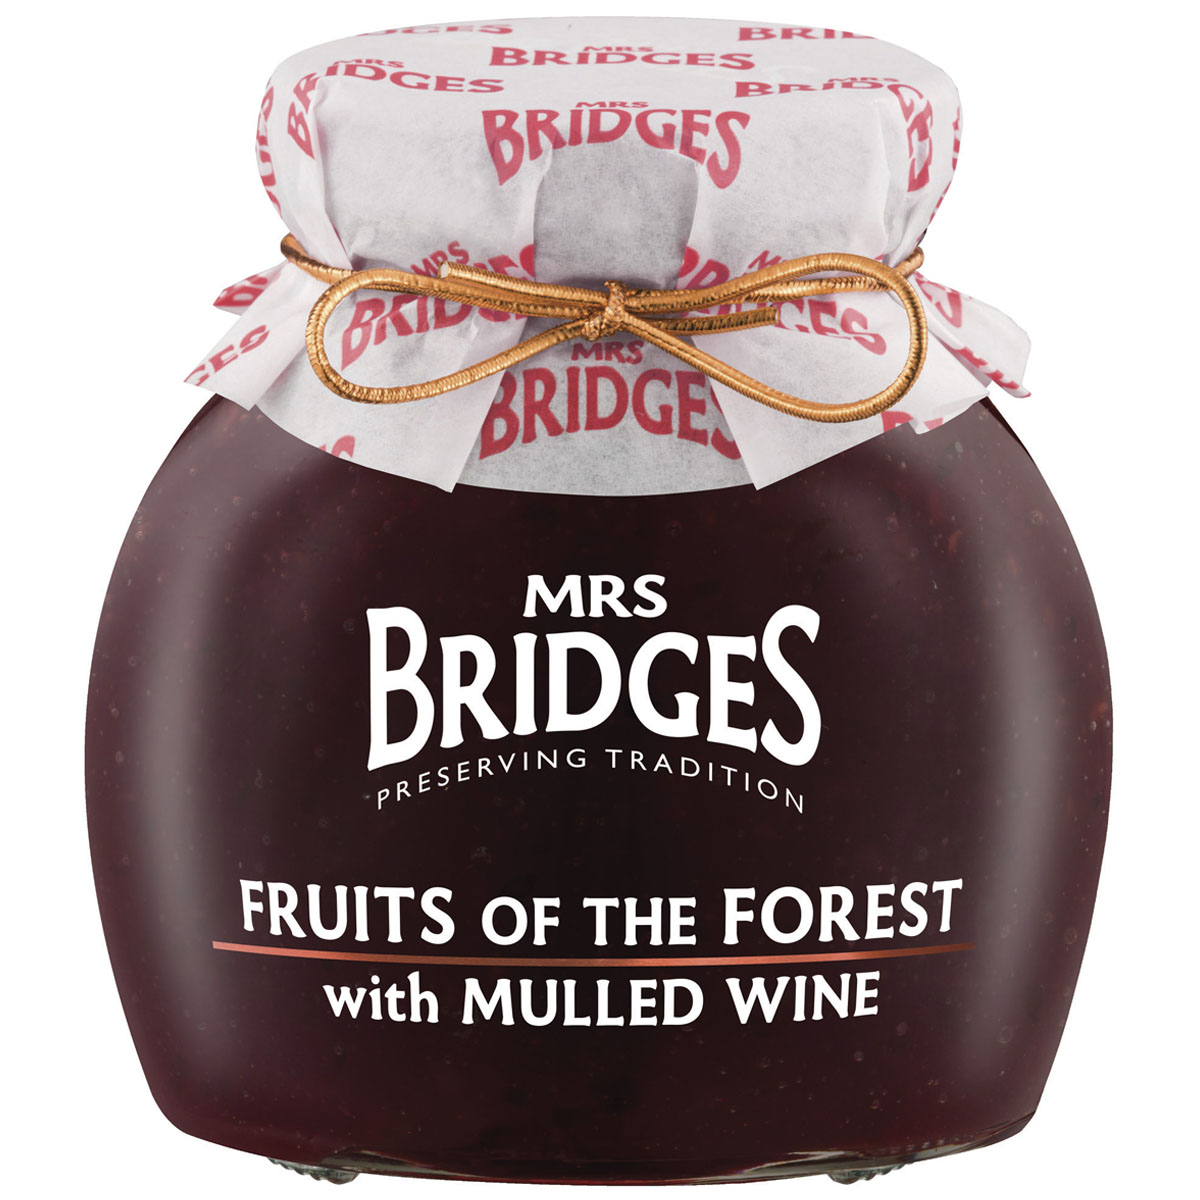 Mrs Bridges – Fruits of the Forest Preserve with Mulled Wine 340g